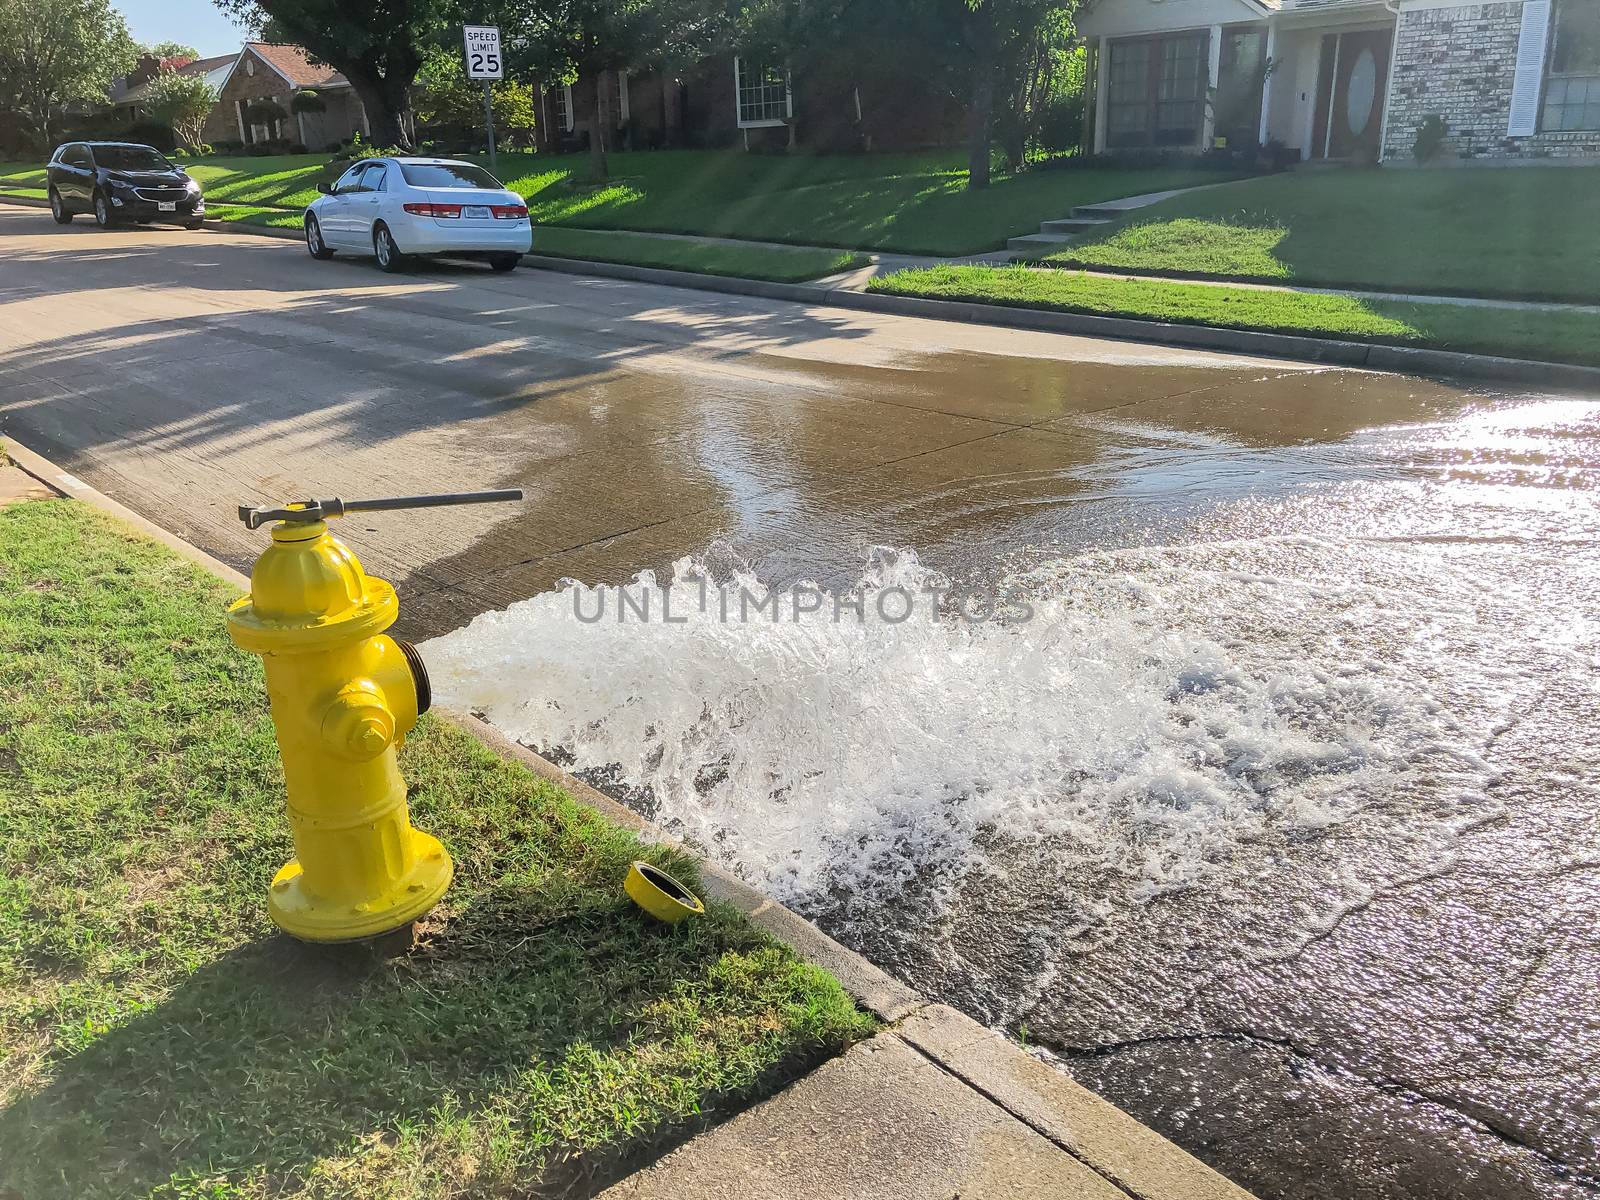 Testing yellow fire hydrant gushing water across a residential street near Dallas, Texas, USA by trongnguyen